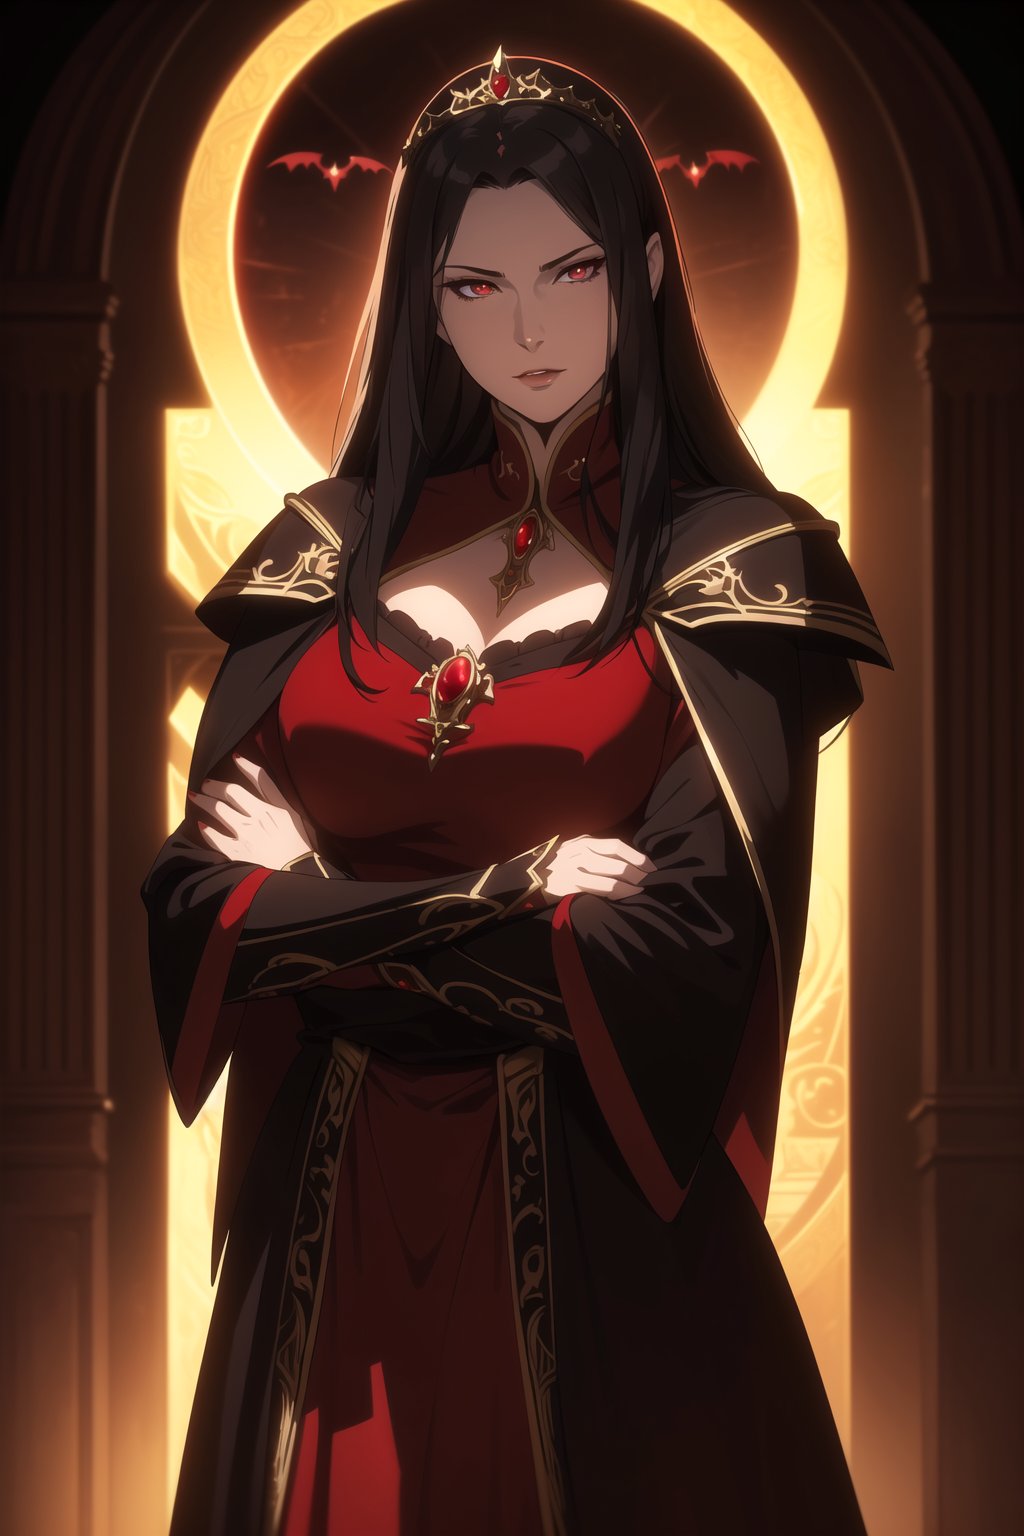 (Masterpiece, Best Quality),  (A Regal 30-Year-Old Looking Female Vampire Queen), (Flowing Ebony Hair), (Regal Ruby Eyes), (Pallid and Alluring Skin), (Wearing Queenly Red Vampire Gown), (Dark Castle Altar:1.2), (Crossed Arms Pose:1.4), Centered, (Half Body Shot:1.4), (From Front Shot:1.4), Insane Details, Intricate Face Detail, Intricate Hand Details, Cinematic Shot and Lighting, Realistic and Vibrant Colors, Sharp Focus, Ultra Detailed, Realistic Images, Depth of Field, Incredibly Realistic Environment and Scene, Master Composition and Cinematography,castlevania style